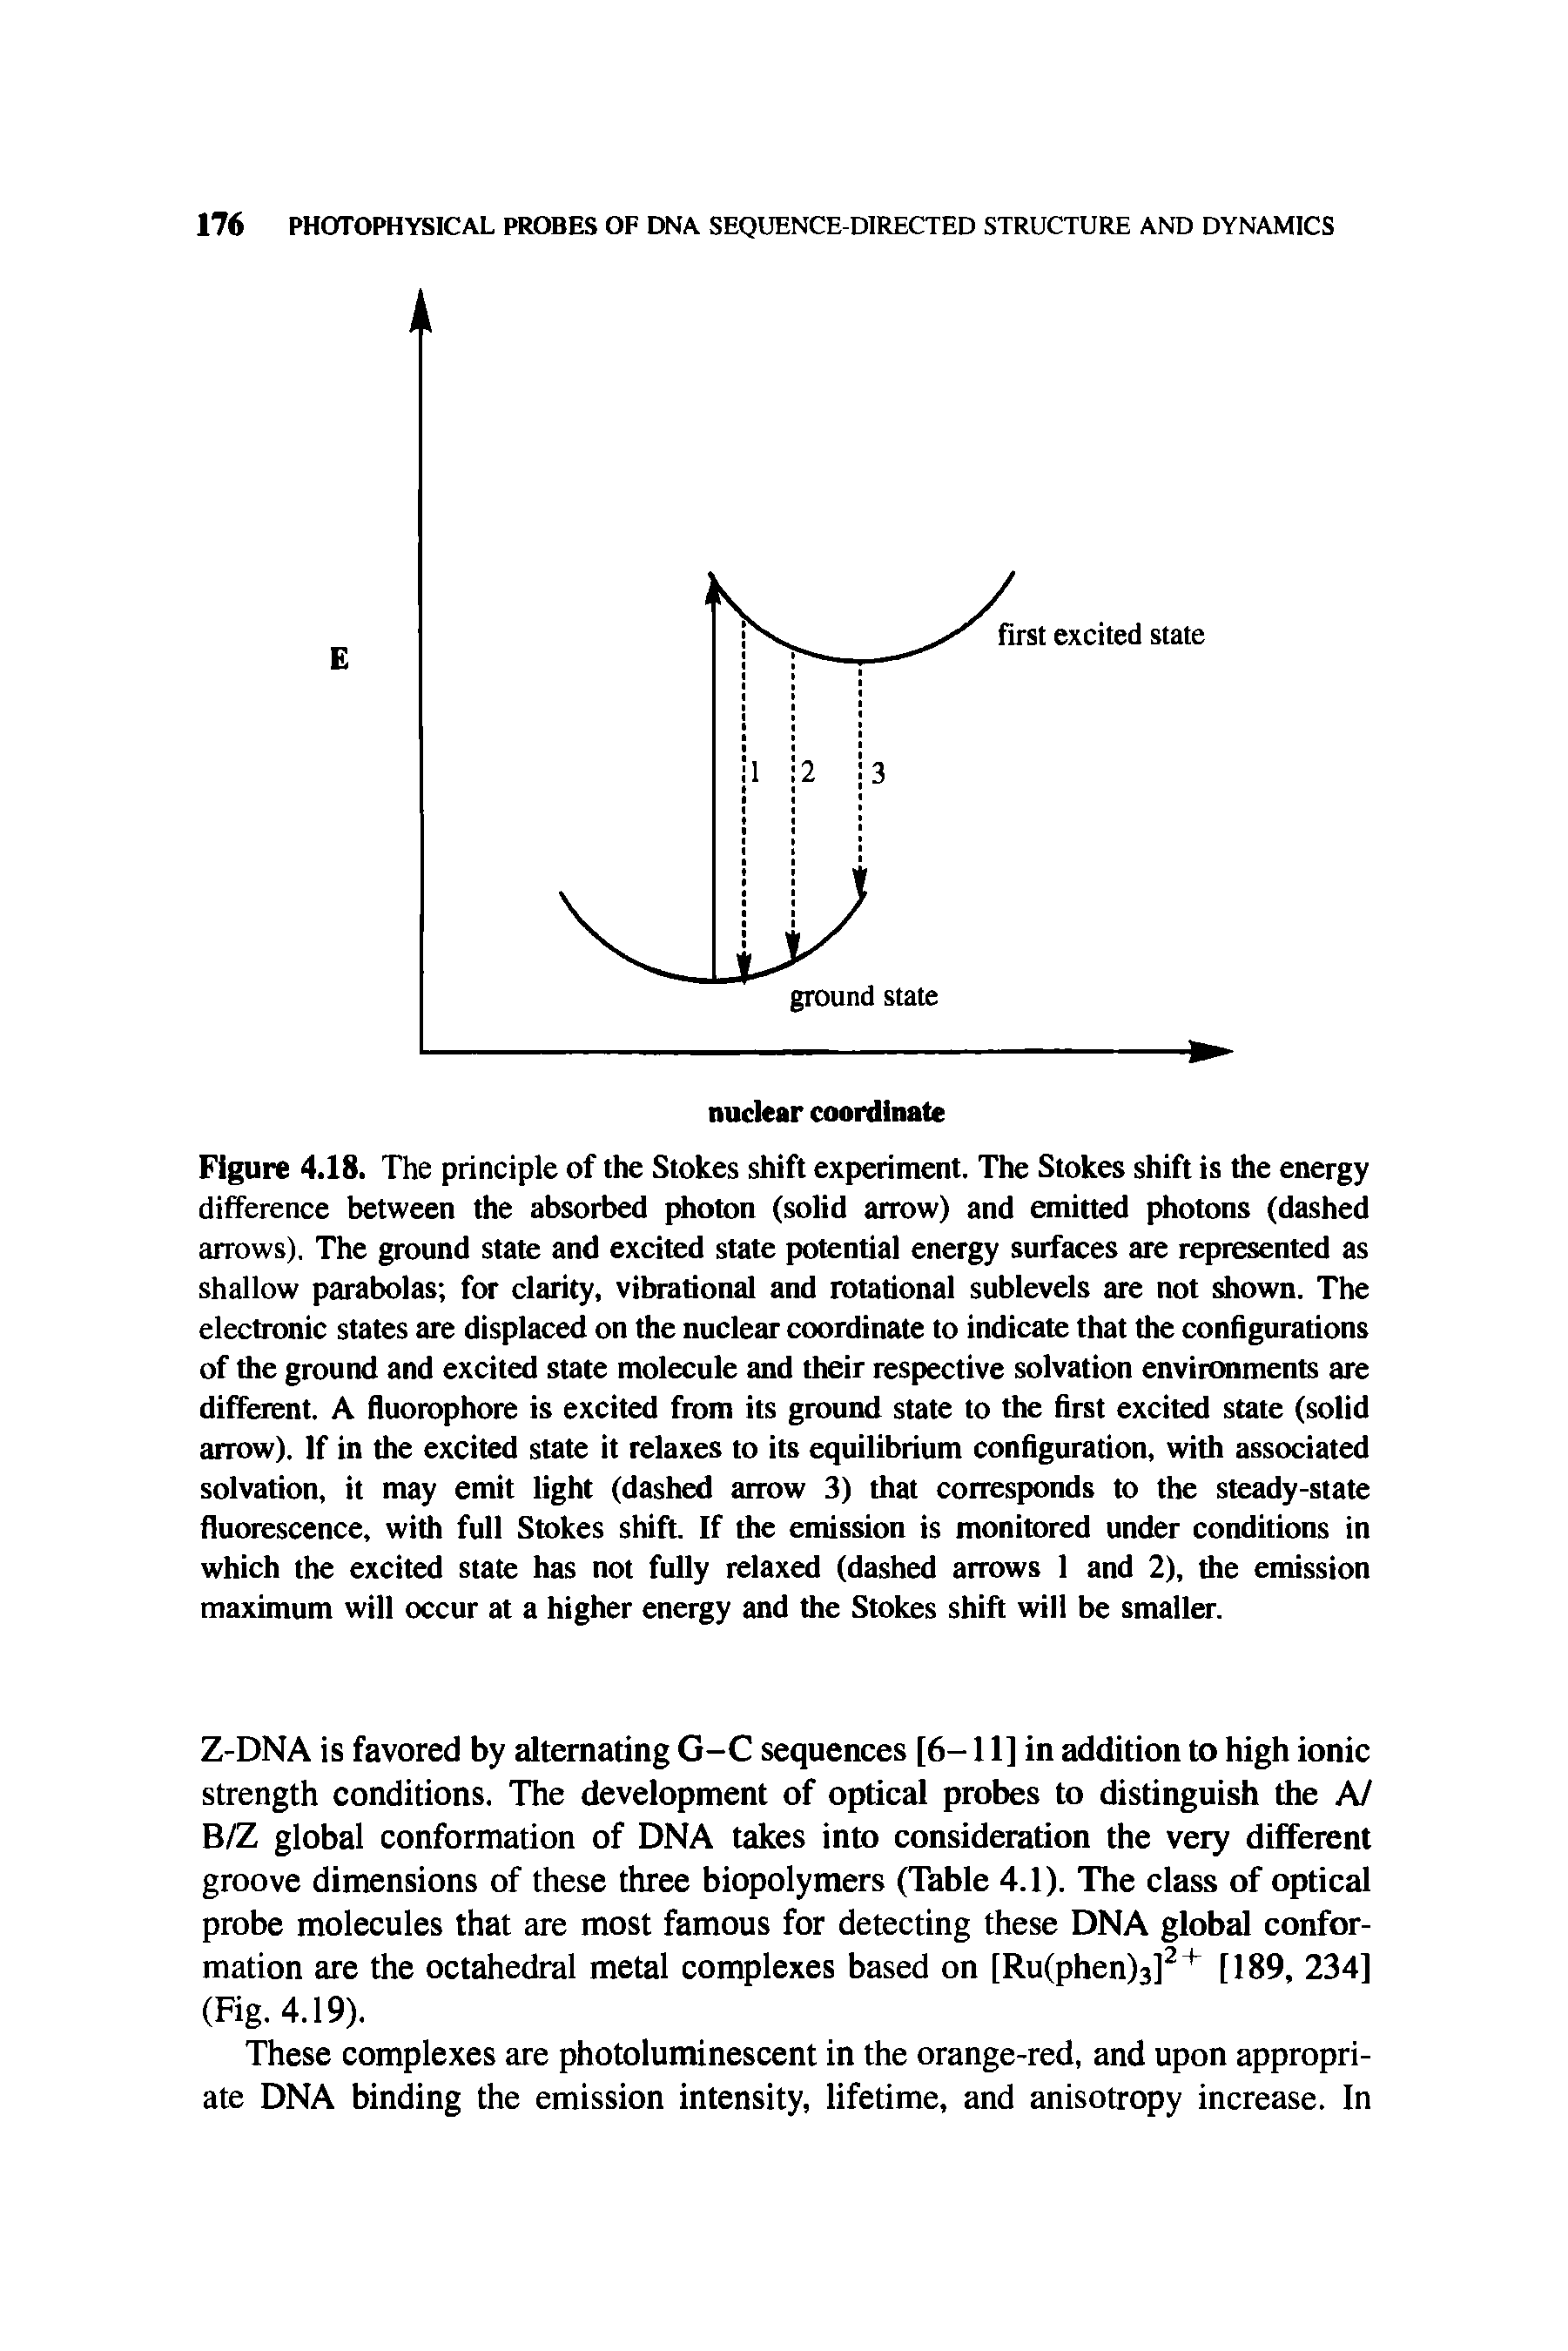 Figure 4.18. The principle of the Stokes shift experiment. The Stokes shift is the energy difference between the absorbed photon (solid arrow) and emitted photons (dashed arrows). The ground state and excited state jwtential energy surfaces are represented as shallow parabolas for clarity, vibrational and rotational sublevels are not shown. The electronic states are displaced on the nuclear coordinate to indicate that the configurations of the ground and excited state molecule and their respective solvation environments are different. A fluorophore is excited from its ground state to the first excited state (solid arrow). If in the excited state it relaxes to its equilibrium configuration, with associated solvation, it may emit light (dashed arrow 3) that corresponds to the steady-state fluorescence, with full Stokes shift. If the emission is monitored under conditions in which the excited state has not fully relaxed (dashed arrows 1 and 2), the emission maximum will occur at a higher energy and the Stokes shift will be smaller.